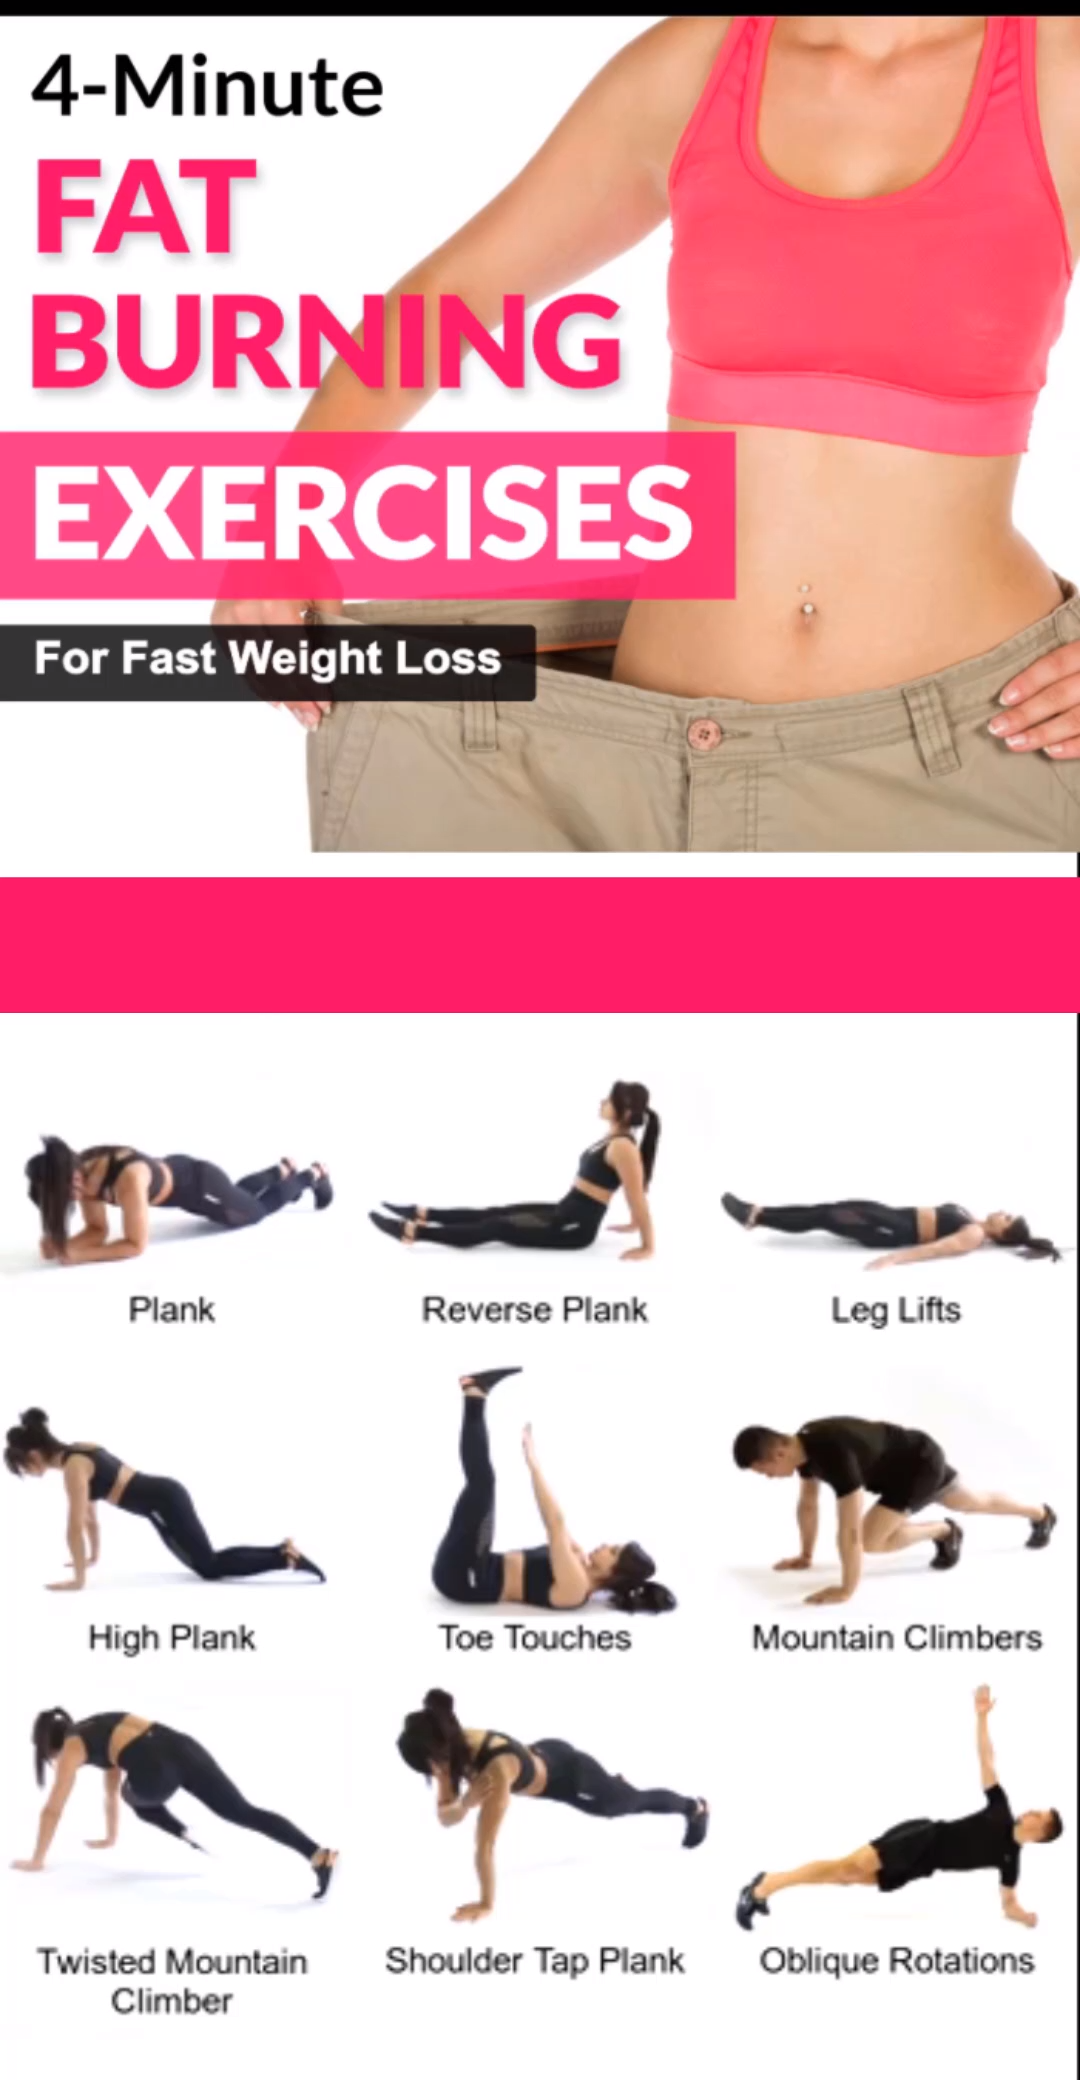 Fat Burning Workouts for Quick Fat Loss -   8 diet Healthy fat burning ideas